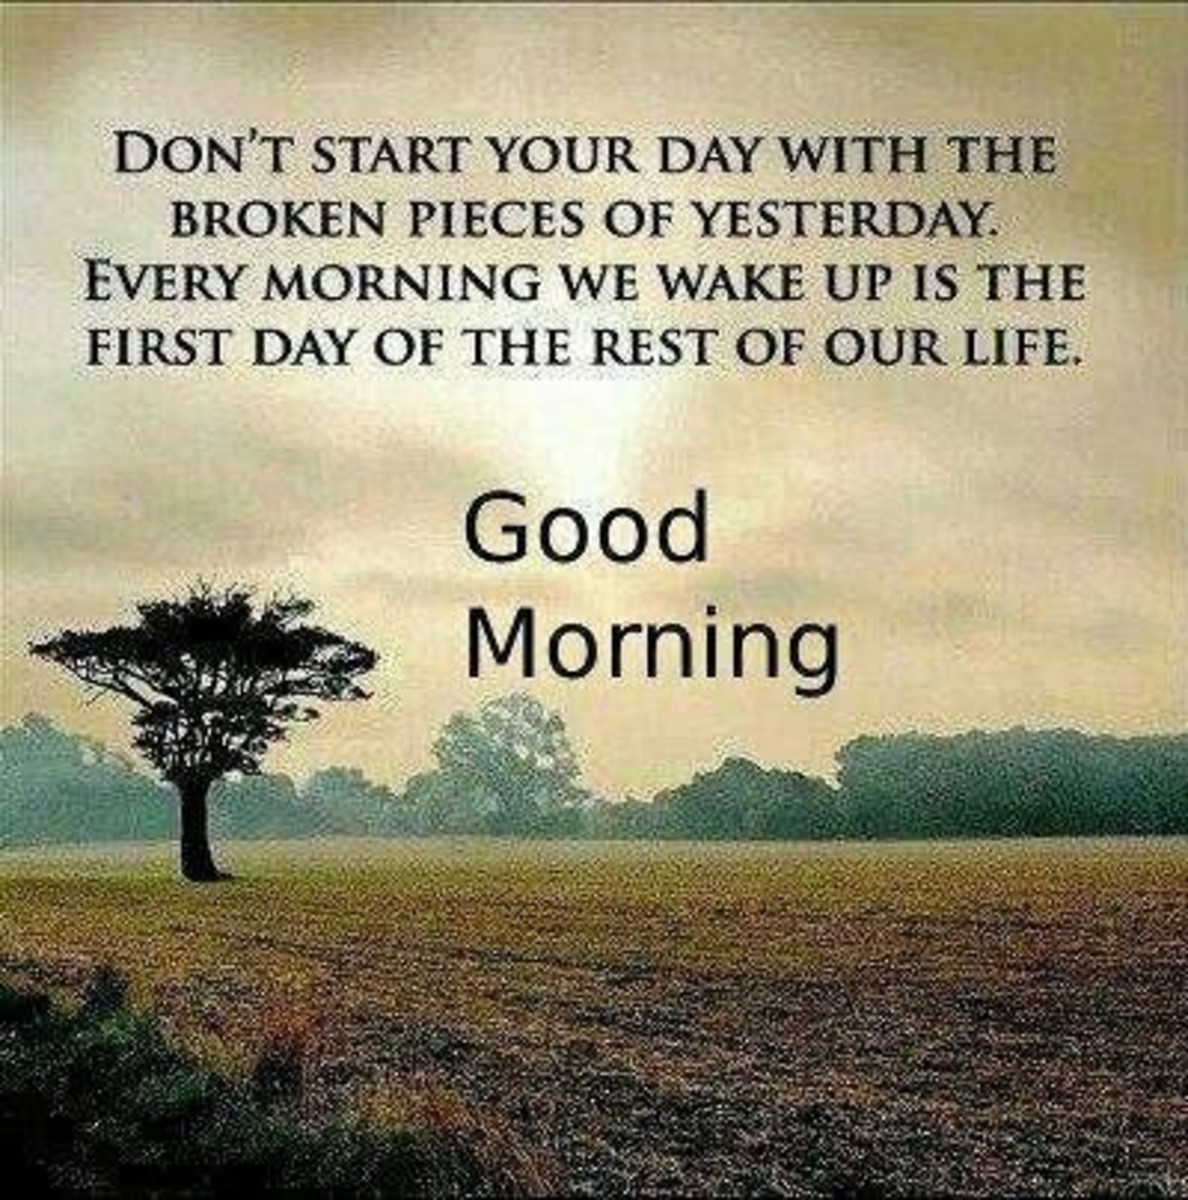 good-morning-quotes-sms-text-and-messages